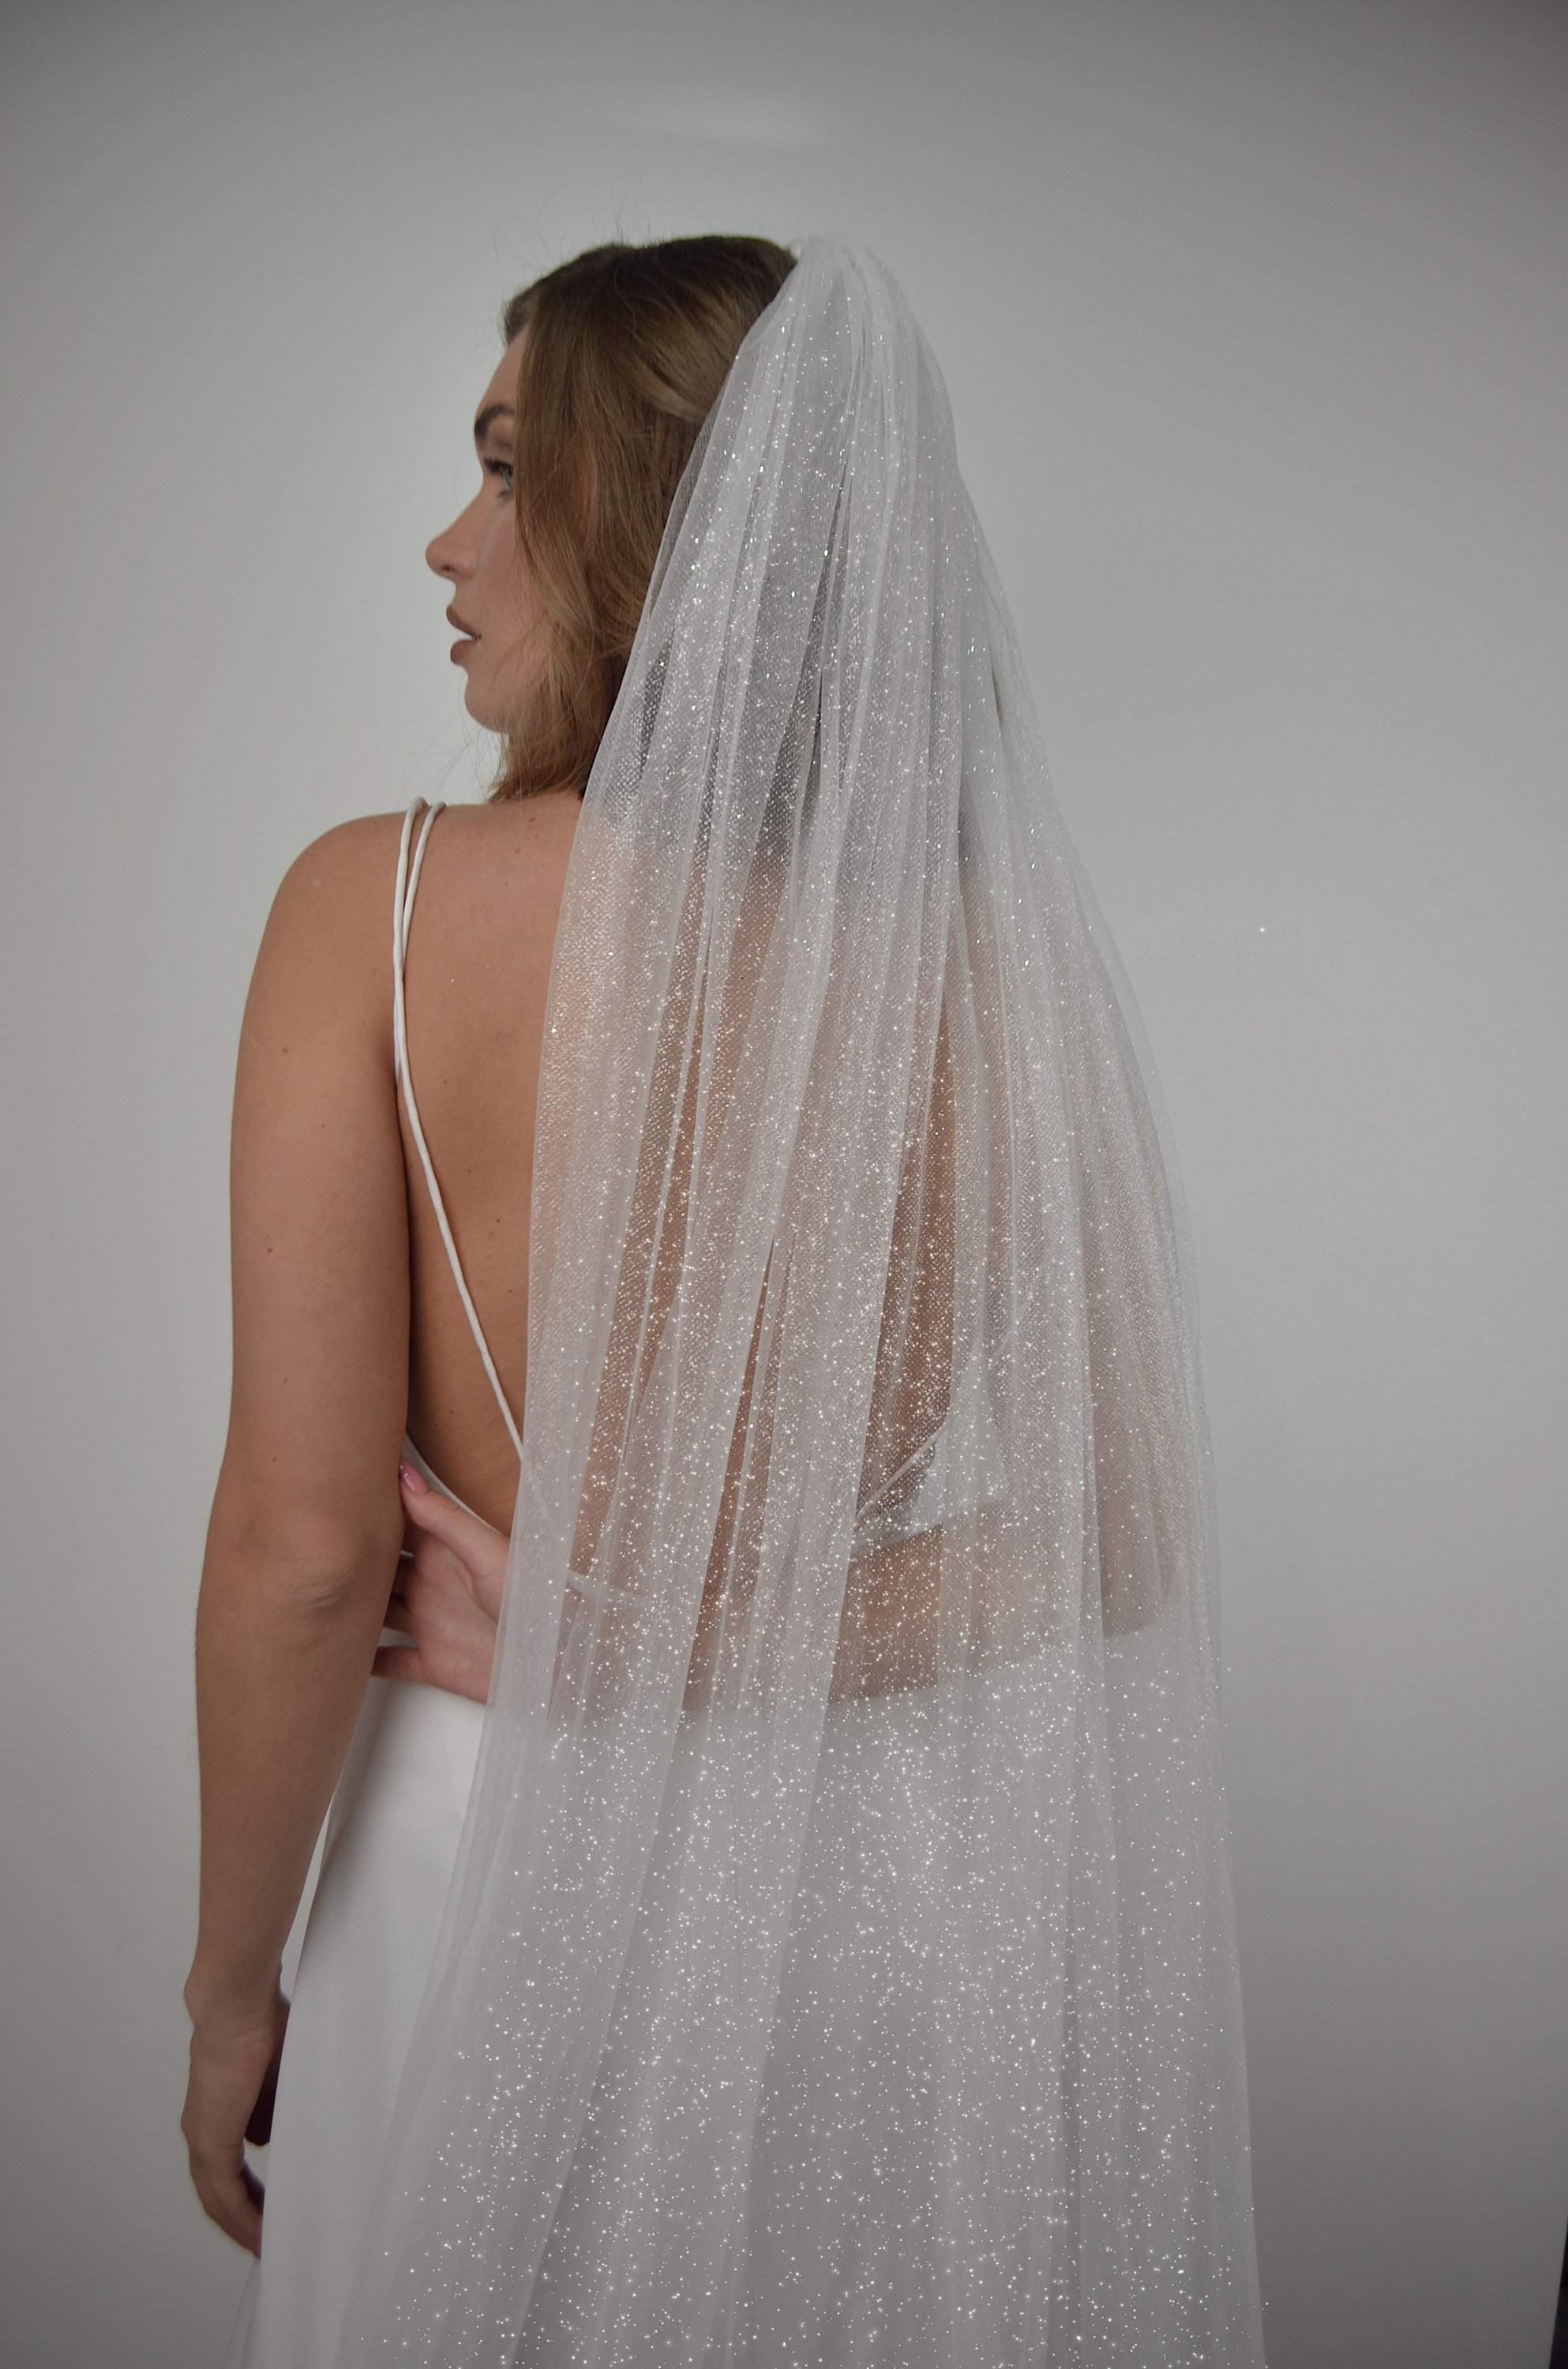 GLITTERING CATHEDRAL VEIL